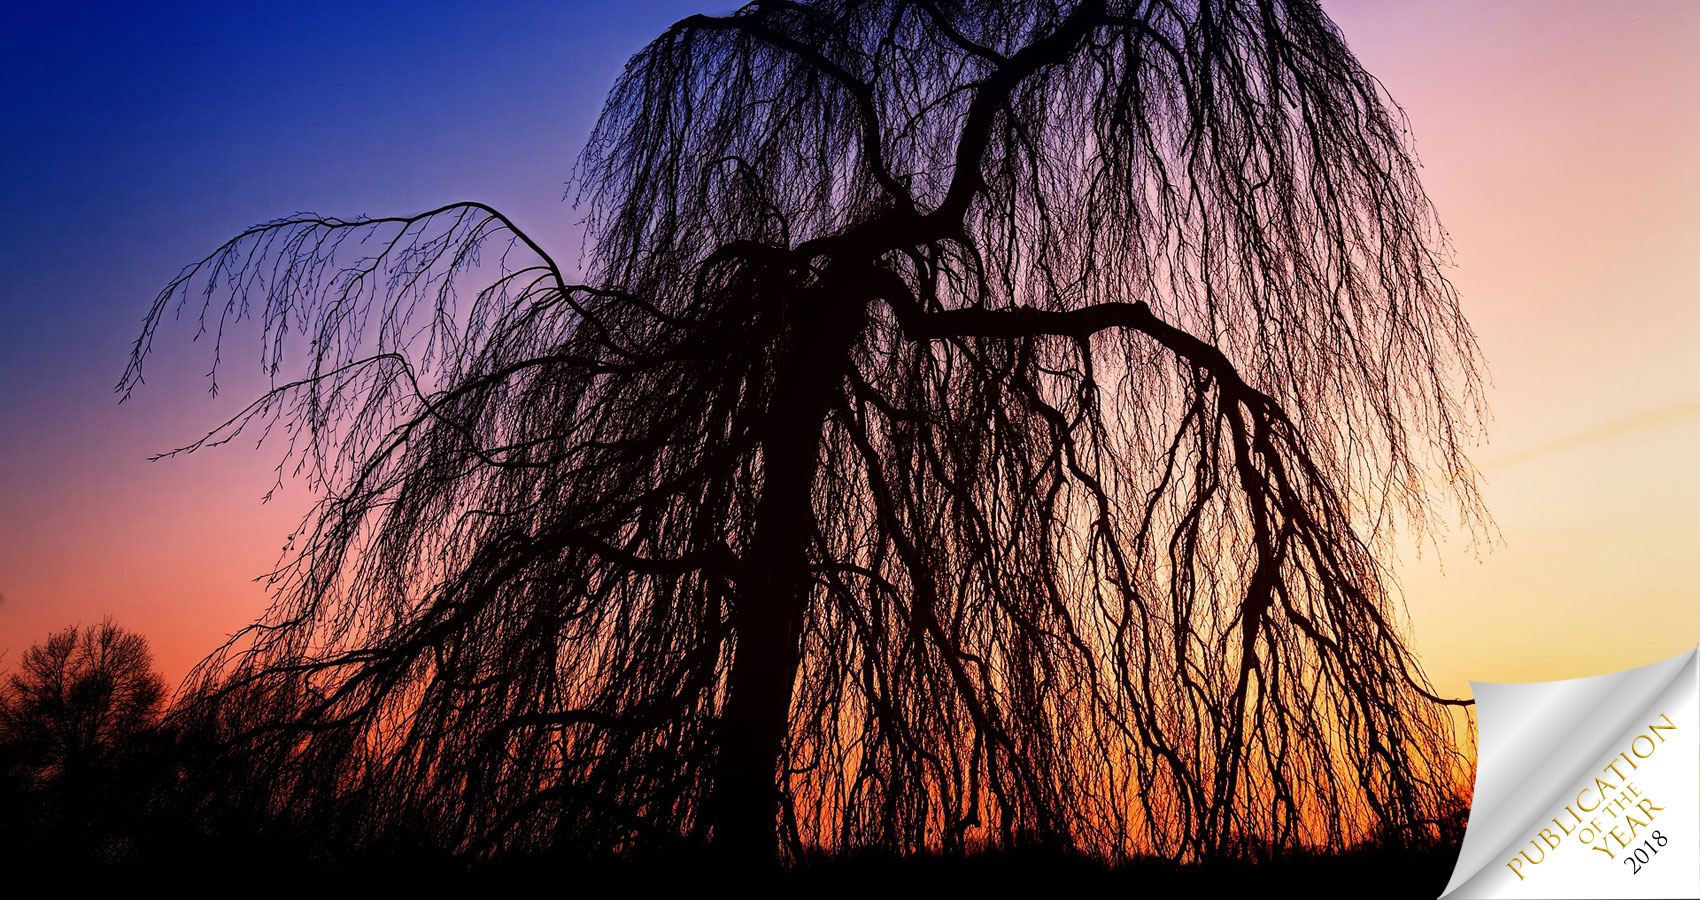 The Willow That Weeps by Laura Hughes at Spillwords.com